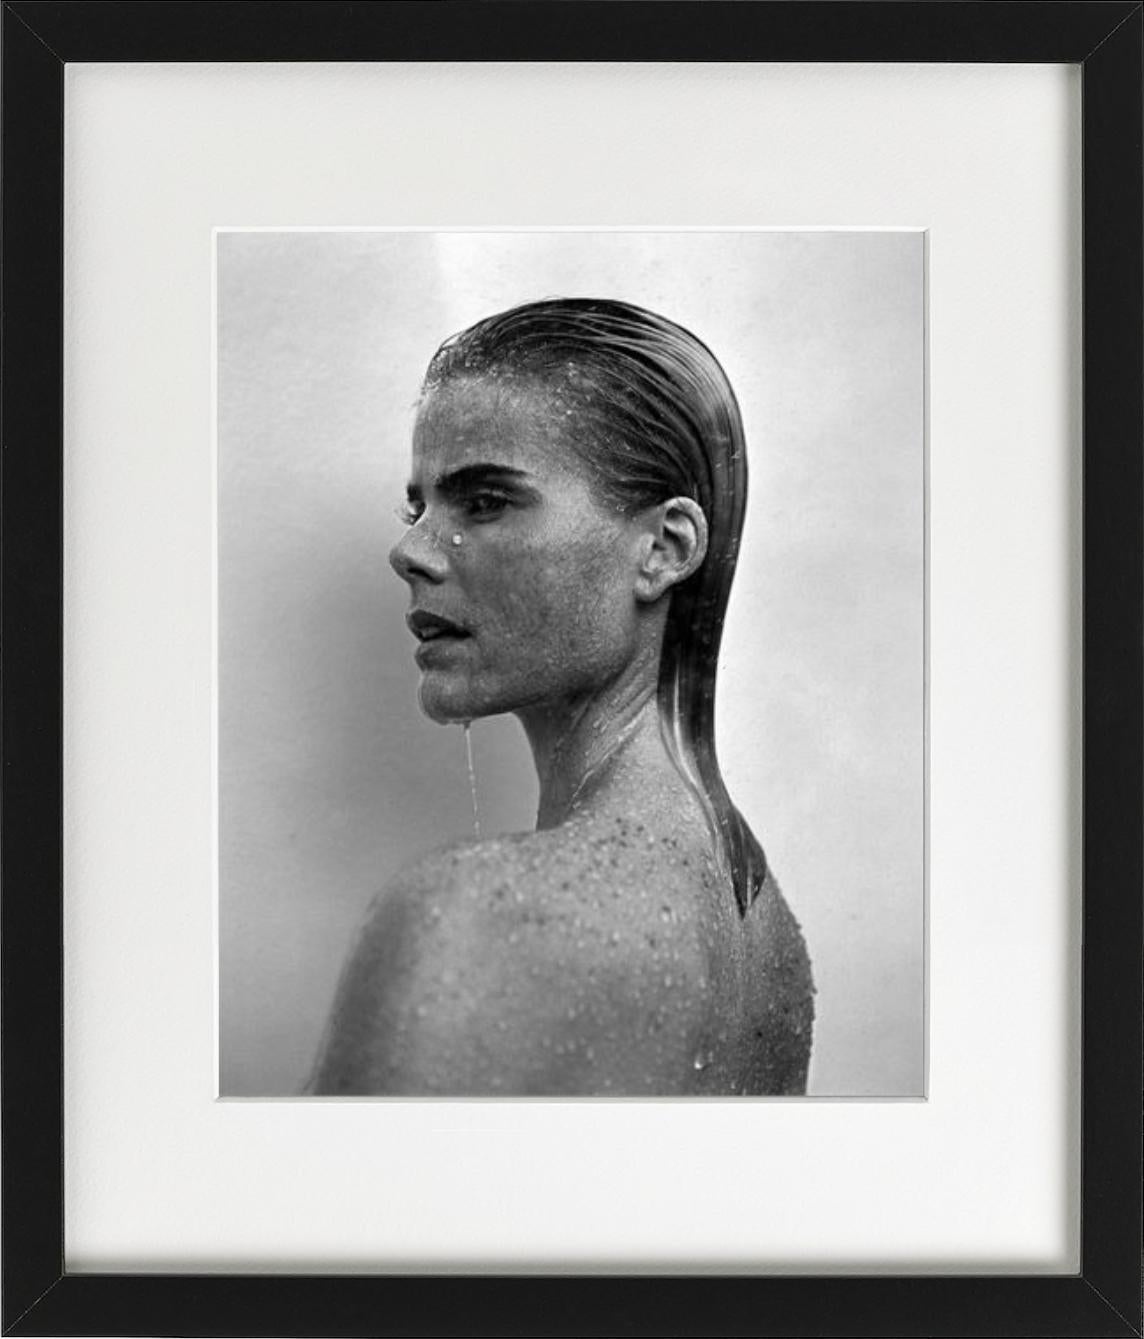 Mariel Hemingway - sideportrait for Vogue Italy, fine art photography, 1992 - Photograph by Michel Comte